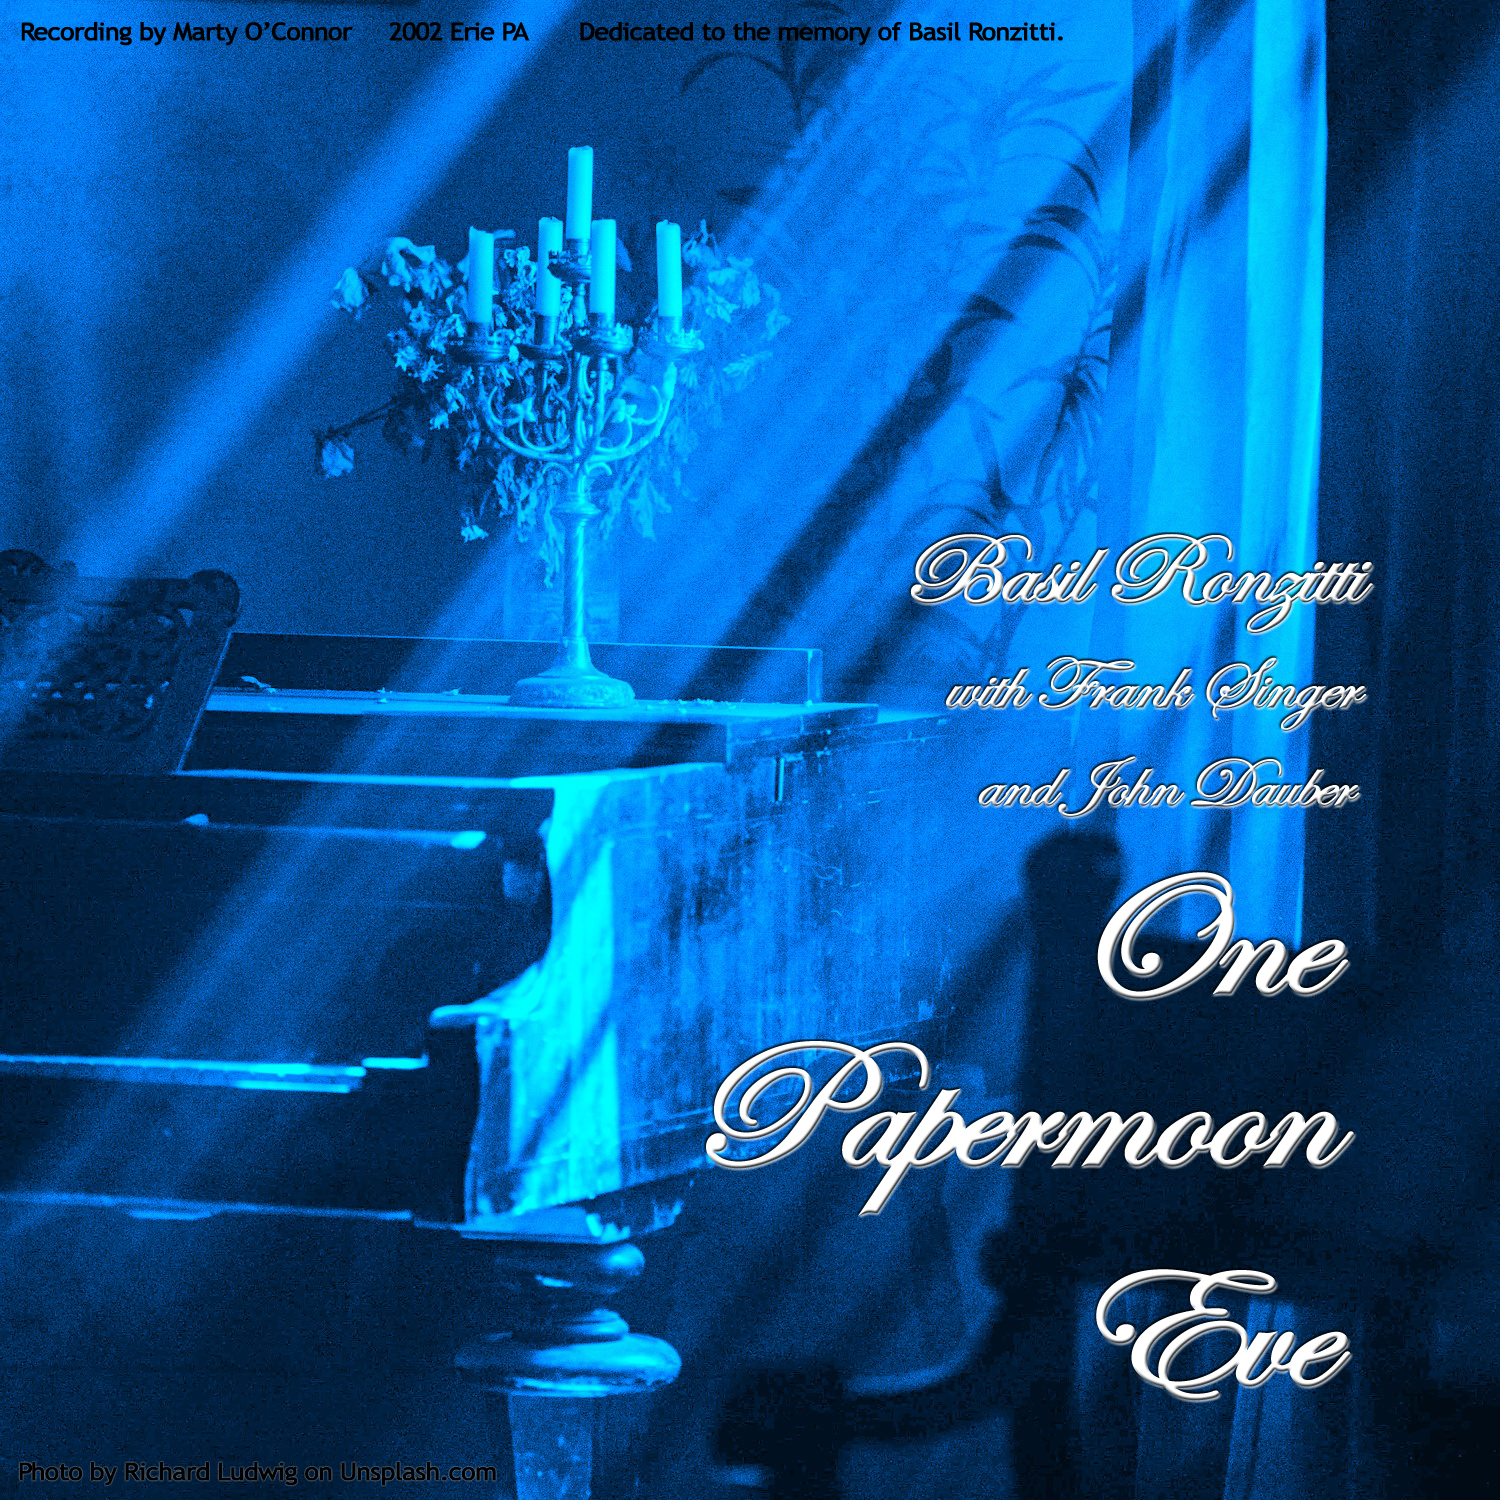 One Papermoon Eve with Basil Ronzitti